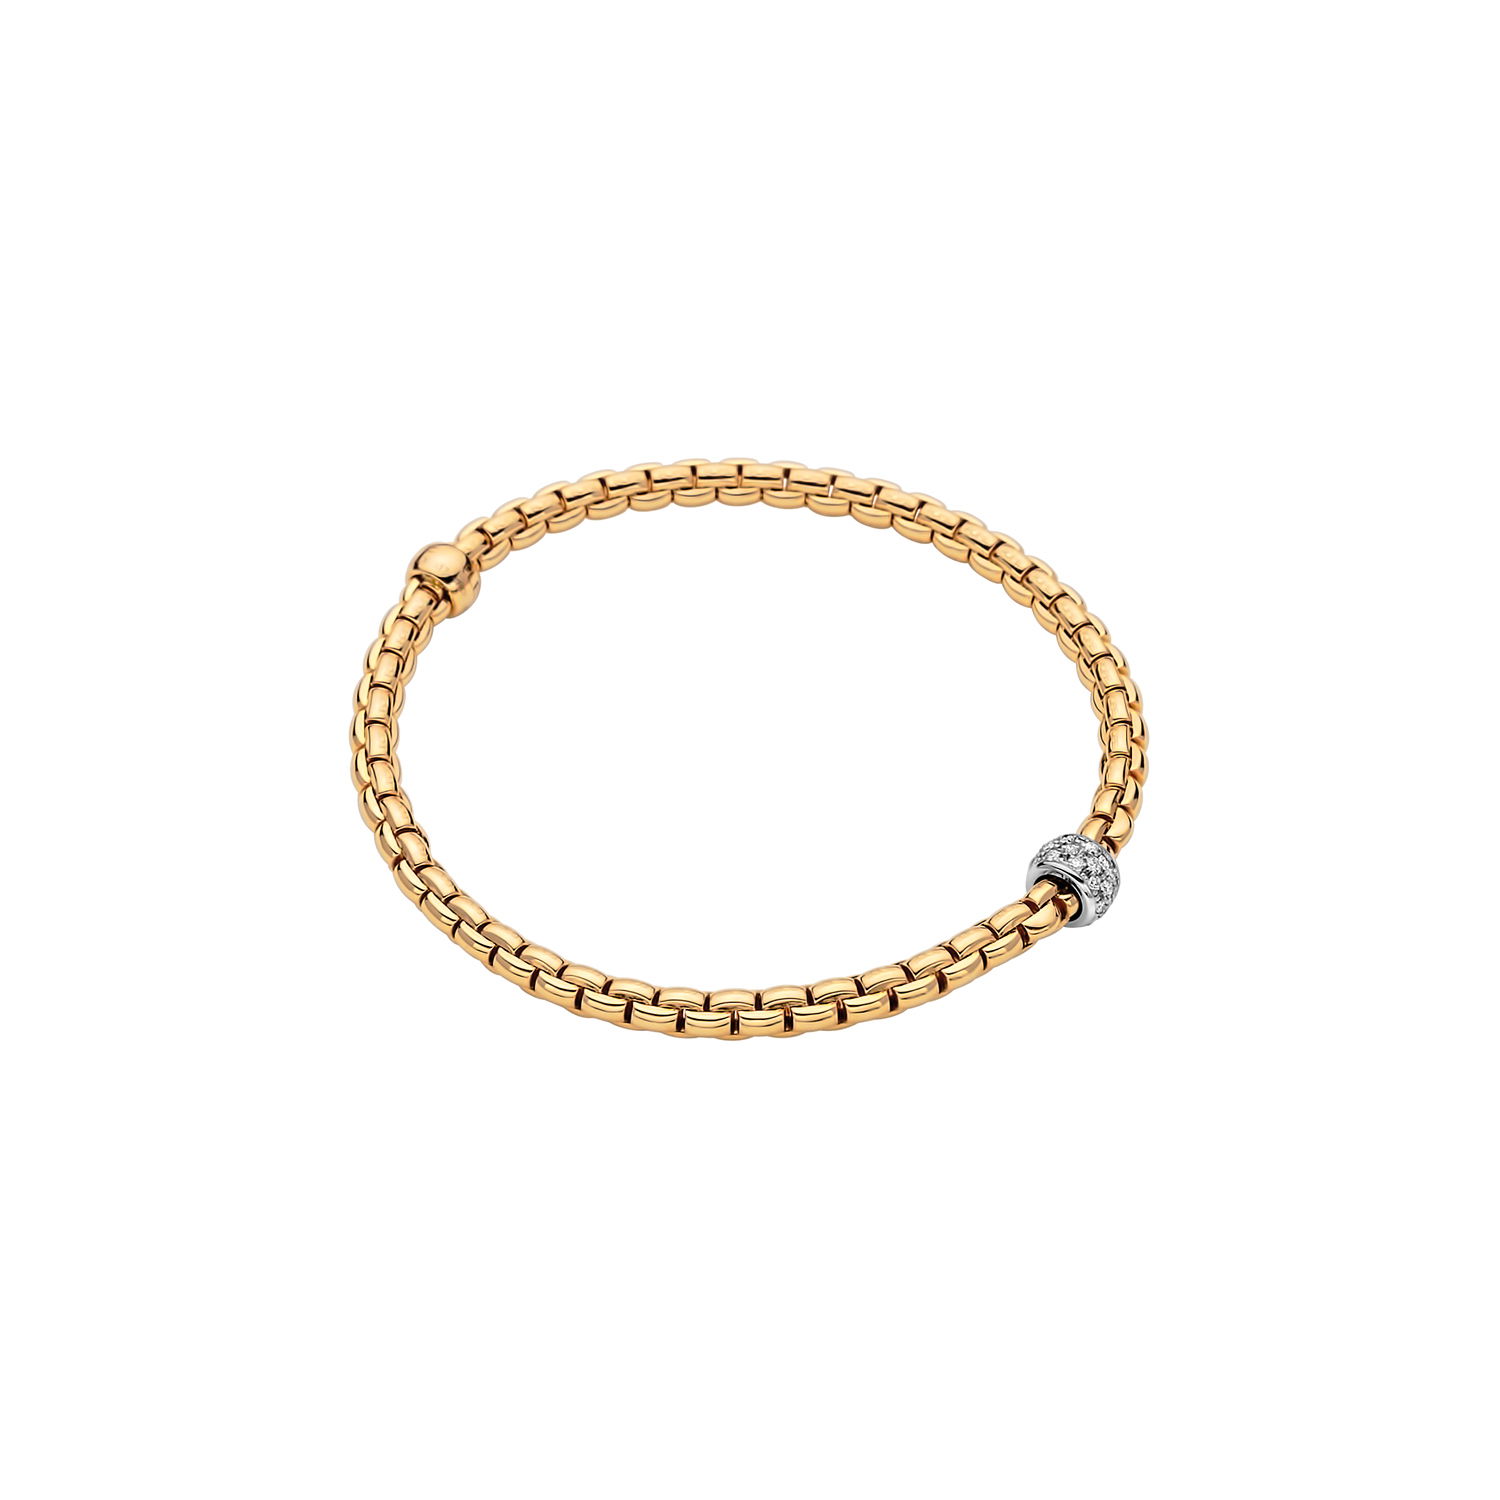 Eka Tiny Bracelet in 18kt Yellow Gold with 1 White Gold and White Diamond Pave Element - 4mm - Size XS